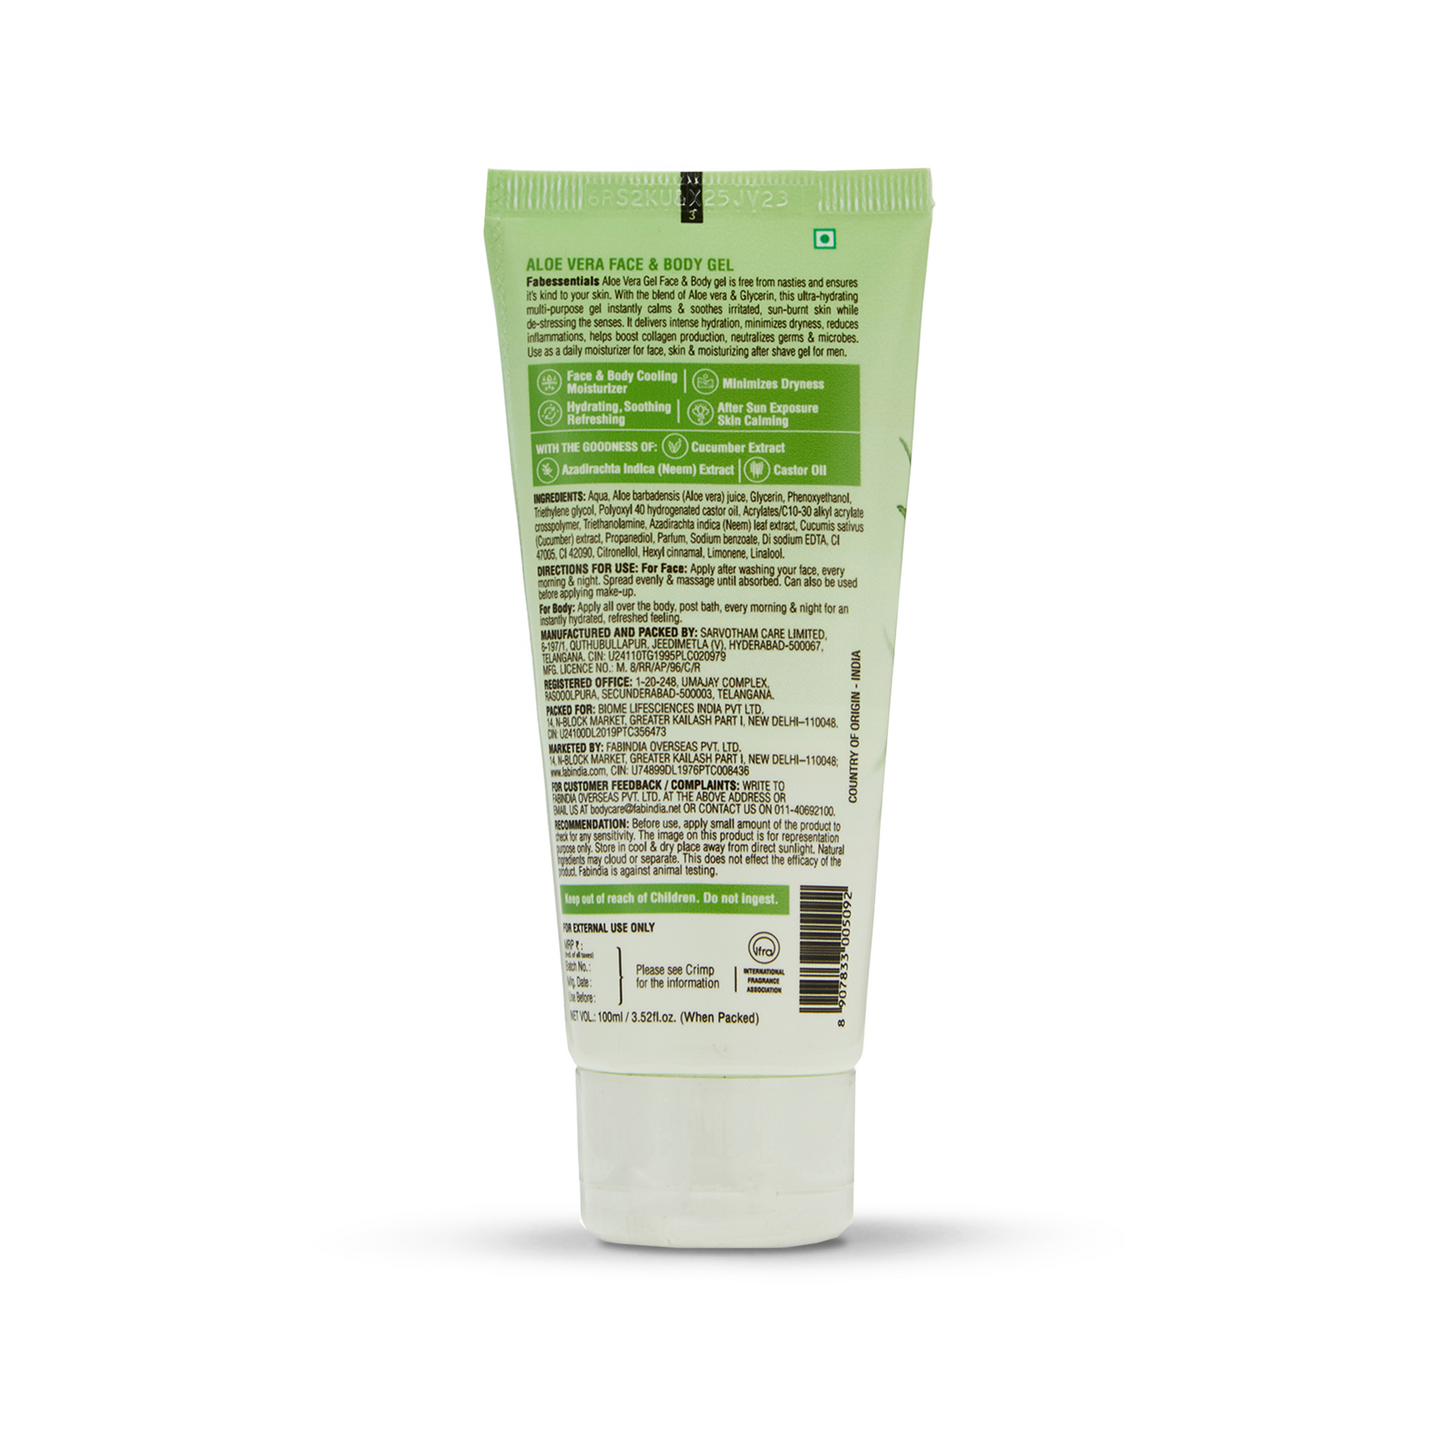 Fabessentials Aloe Vera Face & Body Gel enriched with Neem & Castor Oil, 100gm